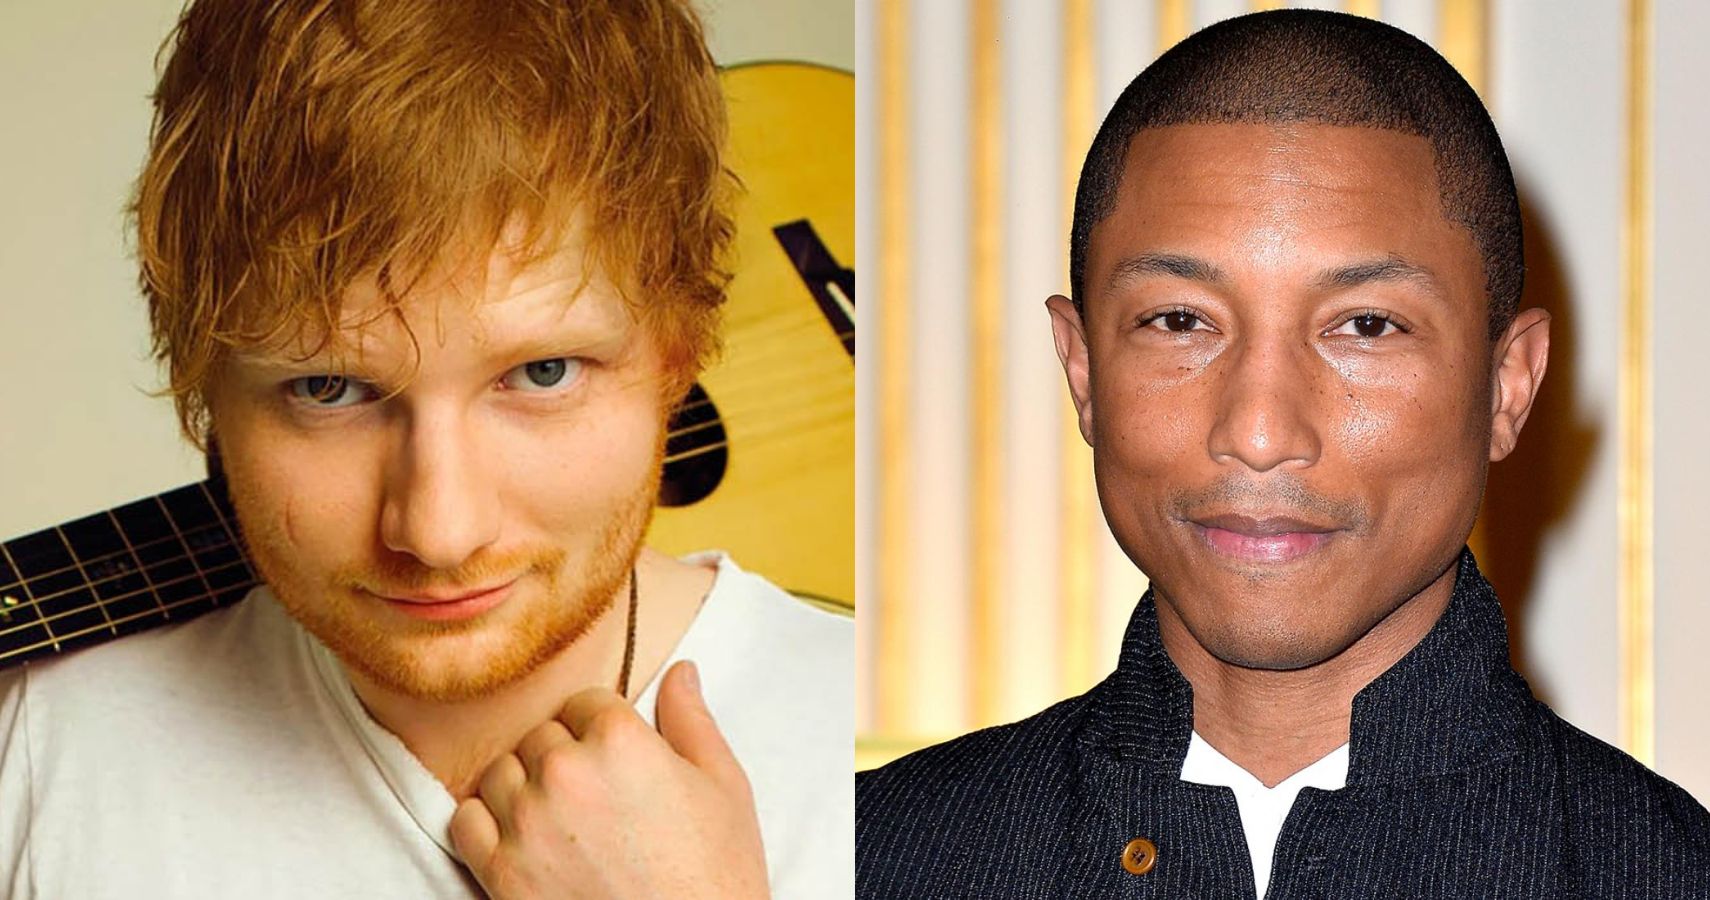 10 Musicians You Had No Idea Secretly Wrote Hit Songs And Are Getting Rich Off Them